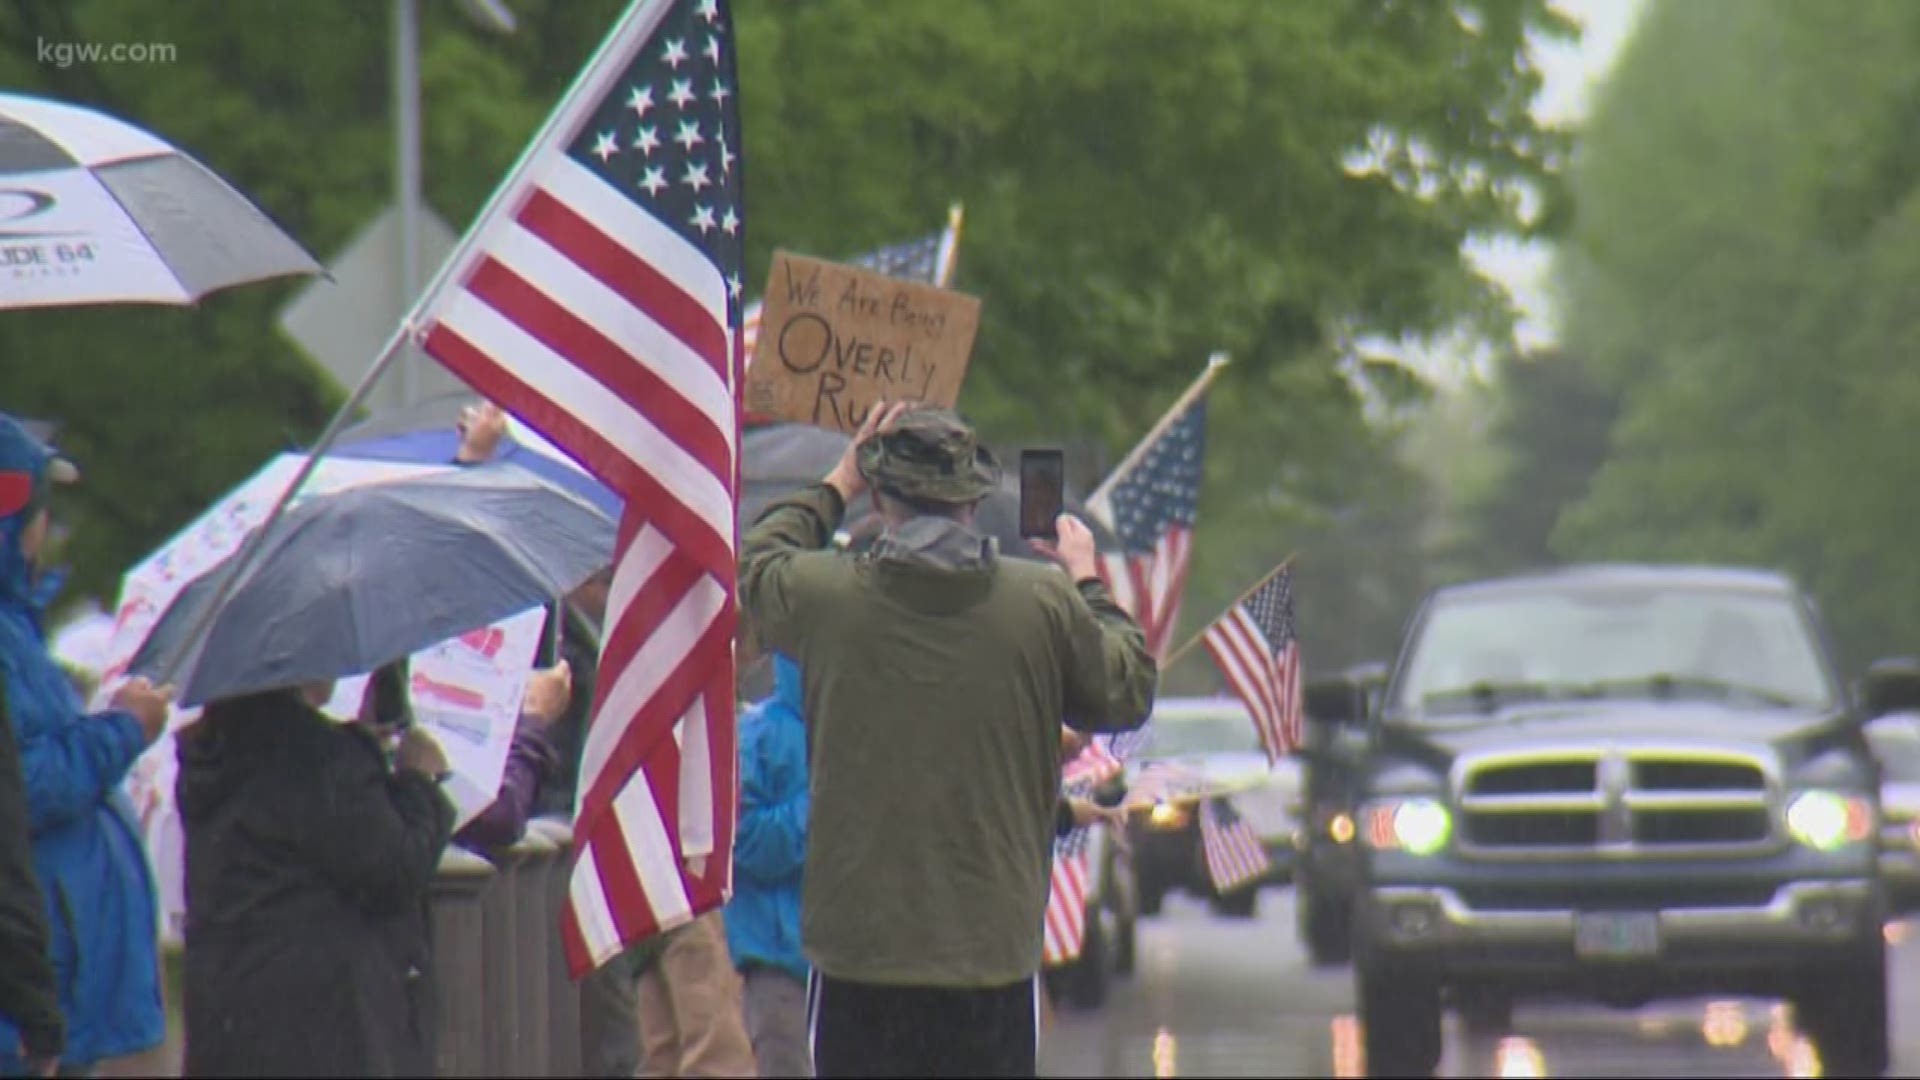 Protestors gathered in Salem on Saturday. They were there to try and persuade officials to reopen the state.